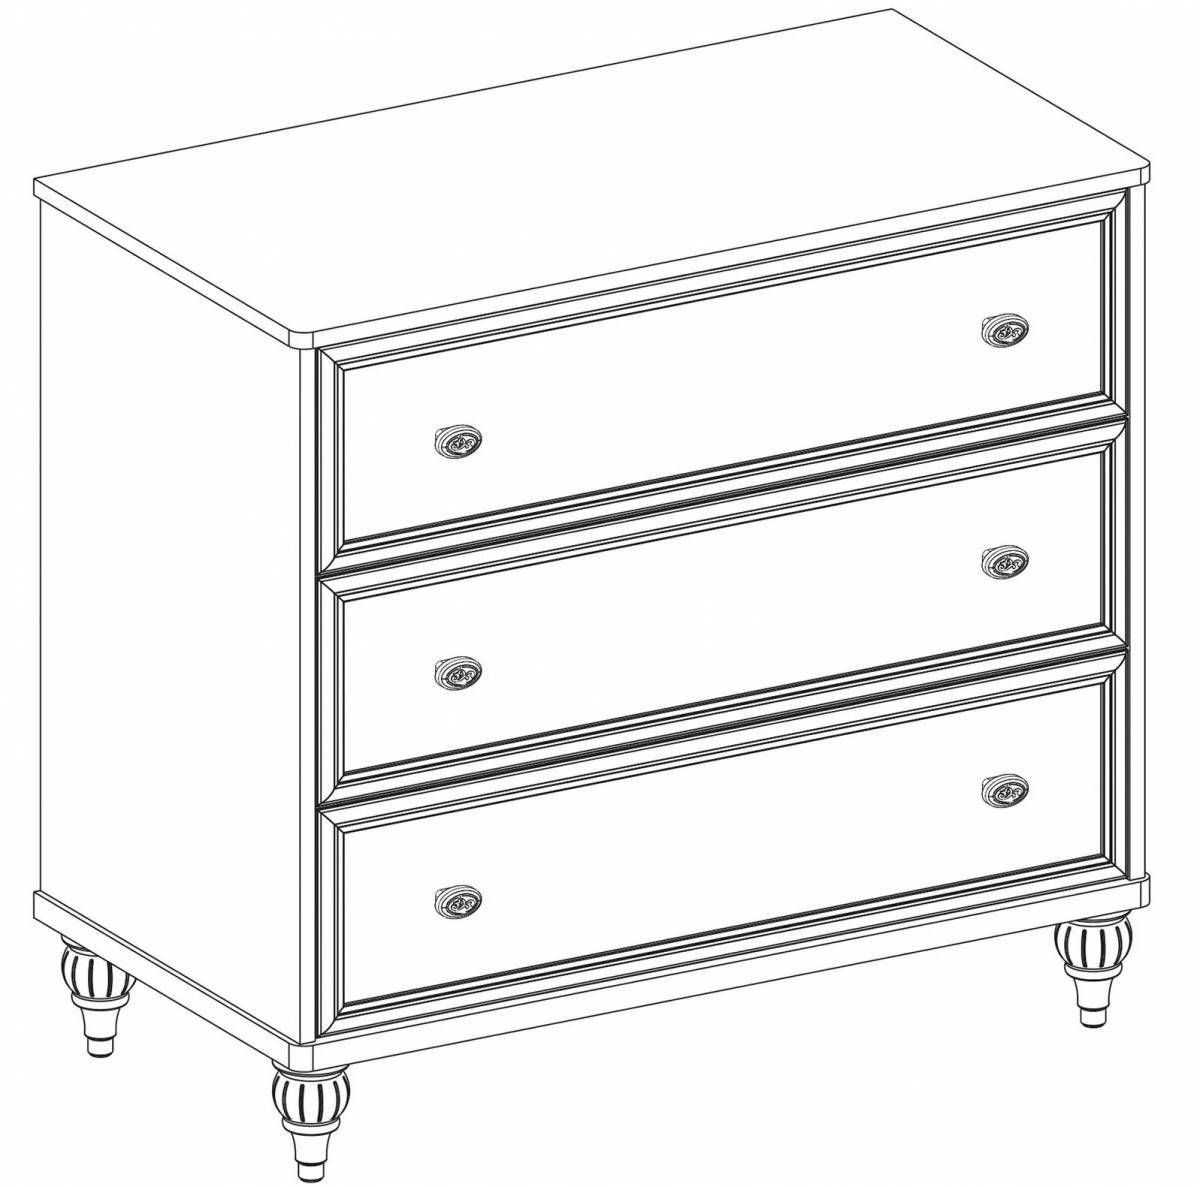 Coloring page with ornate bedside table